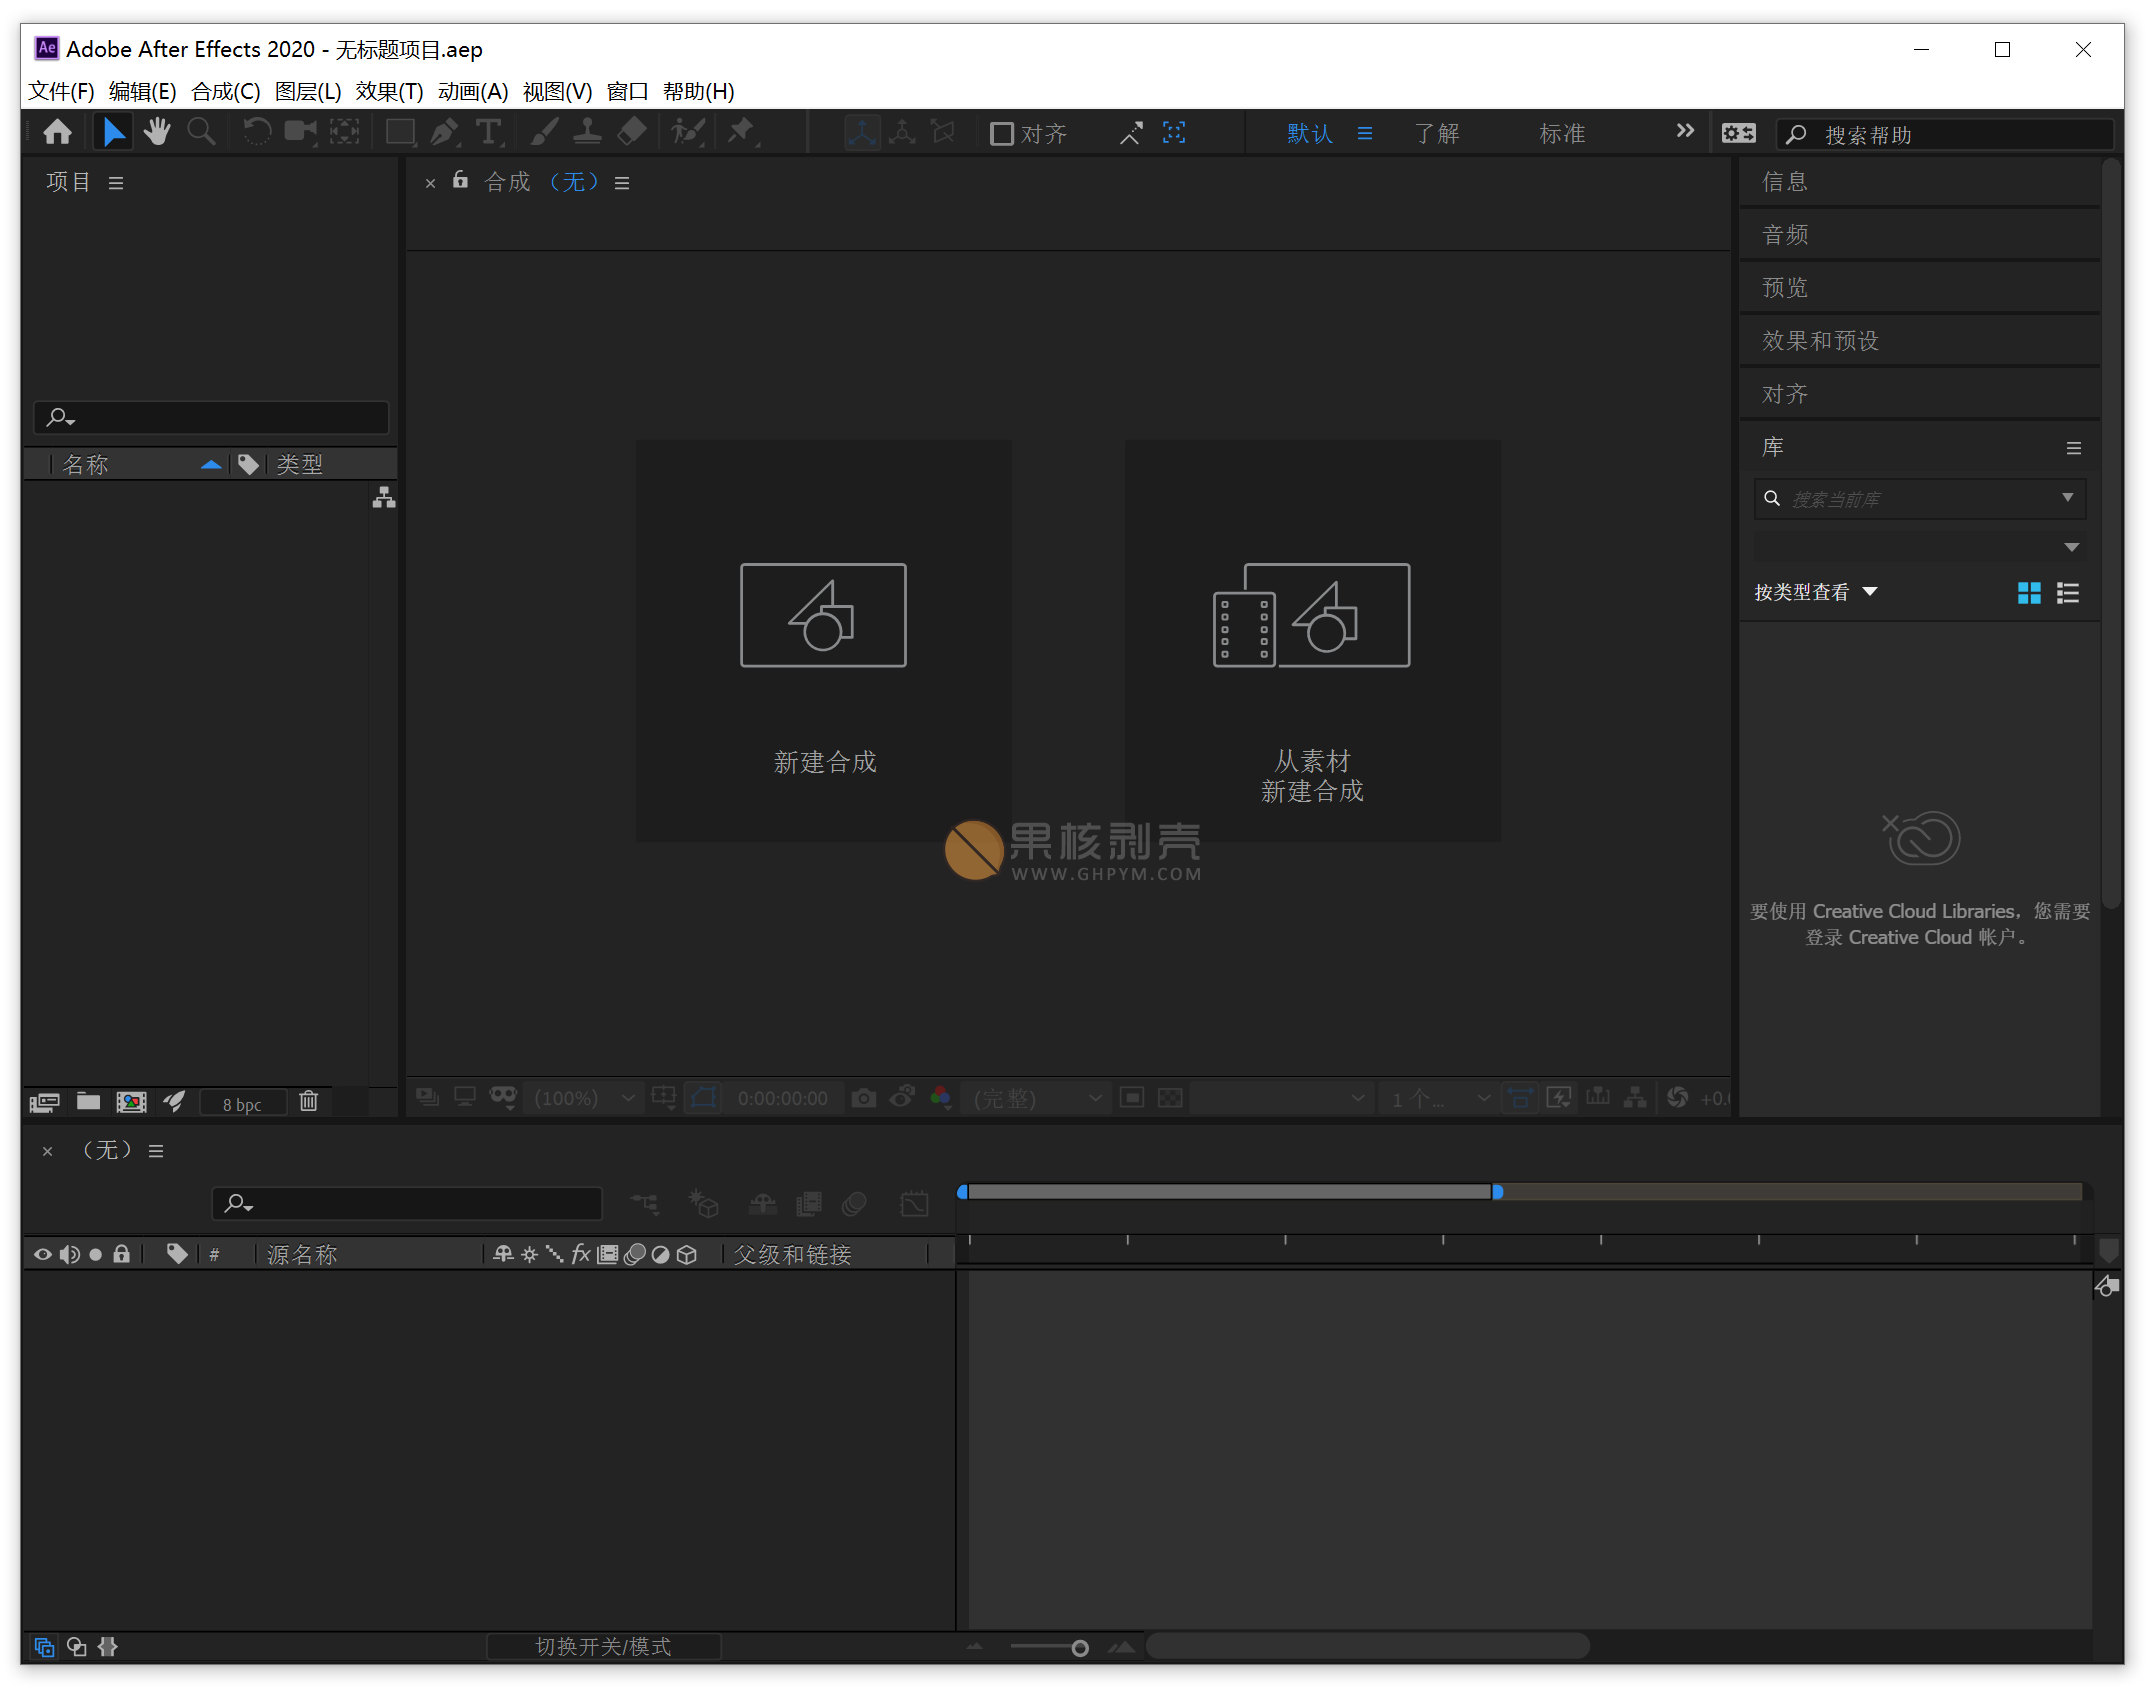 Adobe After Effects 2020(17.7.0.45 ACR13.2) 破解版